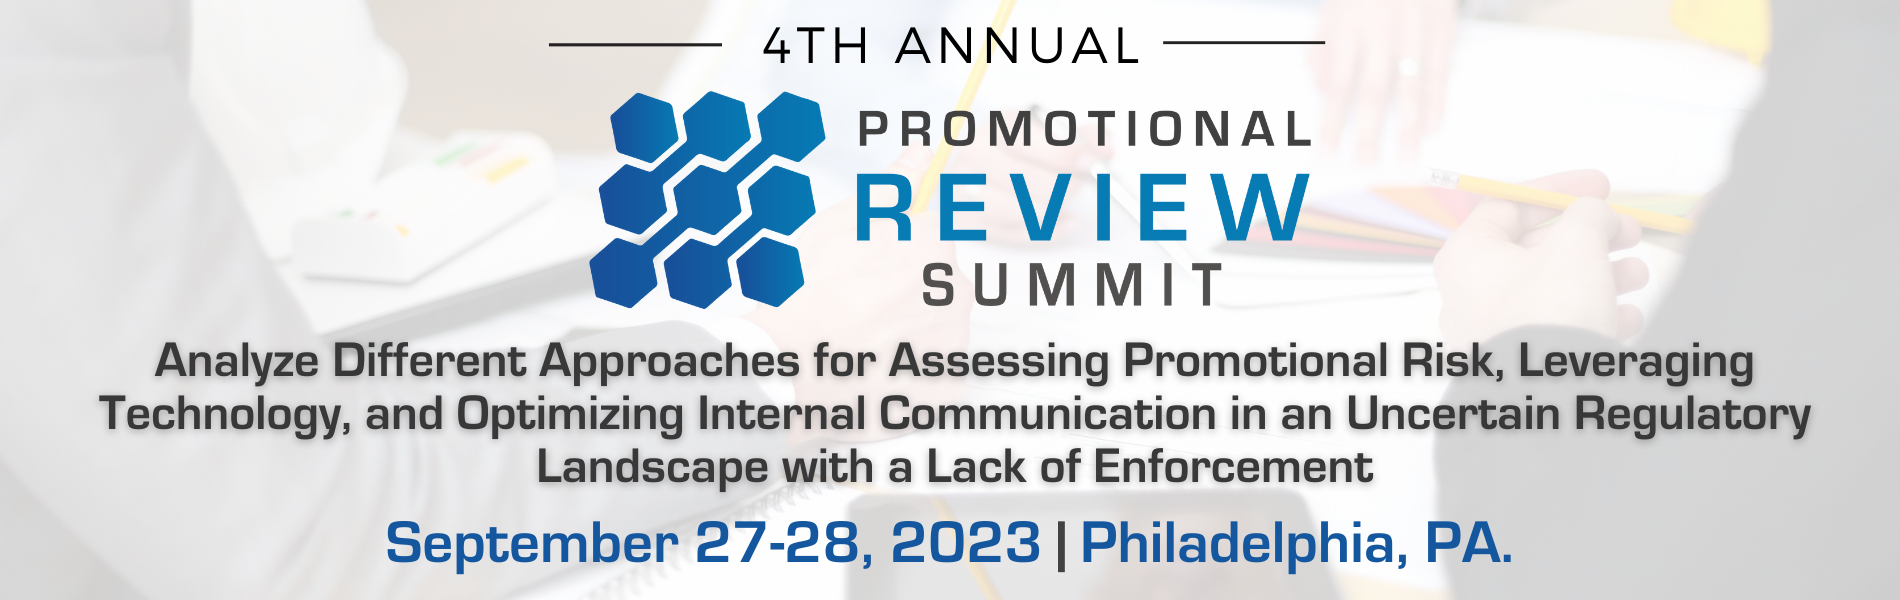 Hearo banner for 4TH Annual, Promotional Review Summit